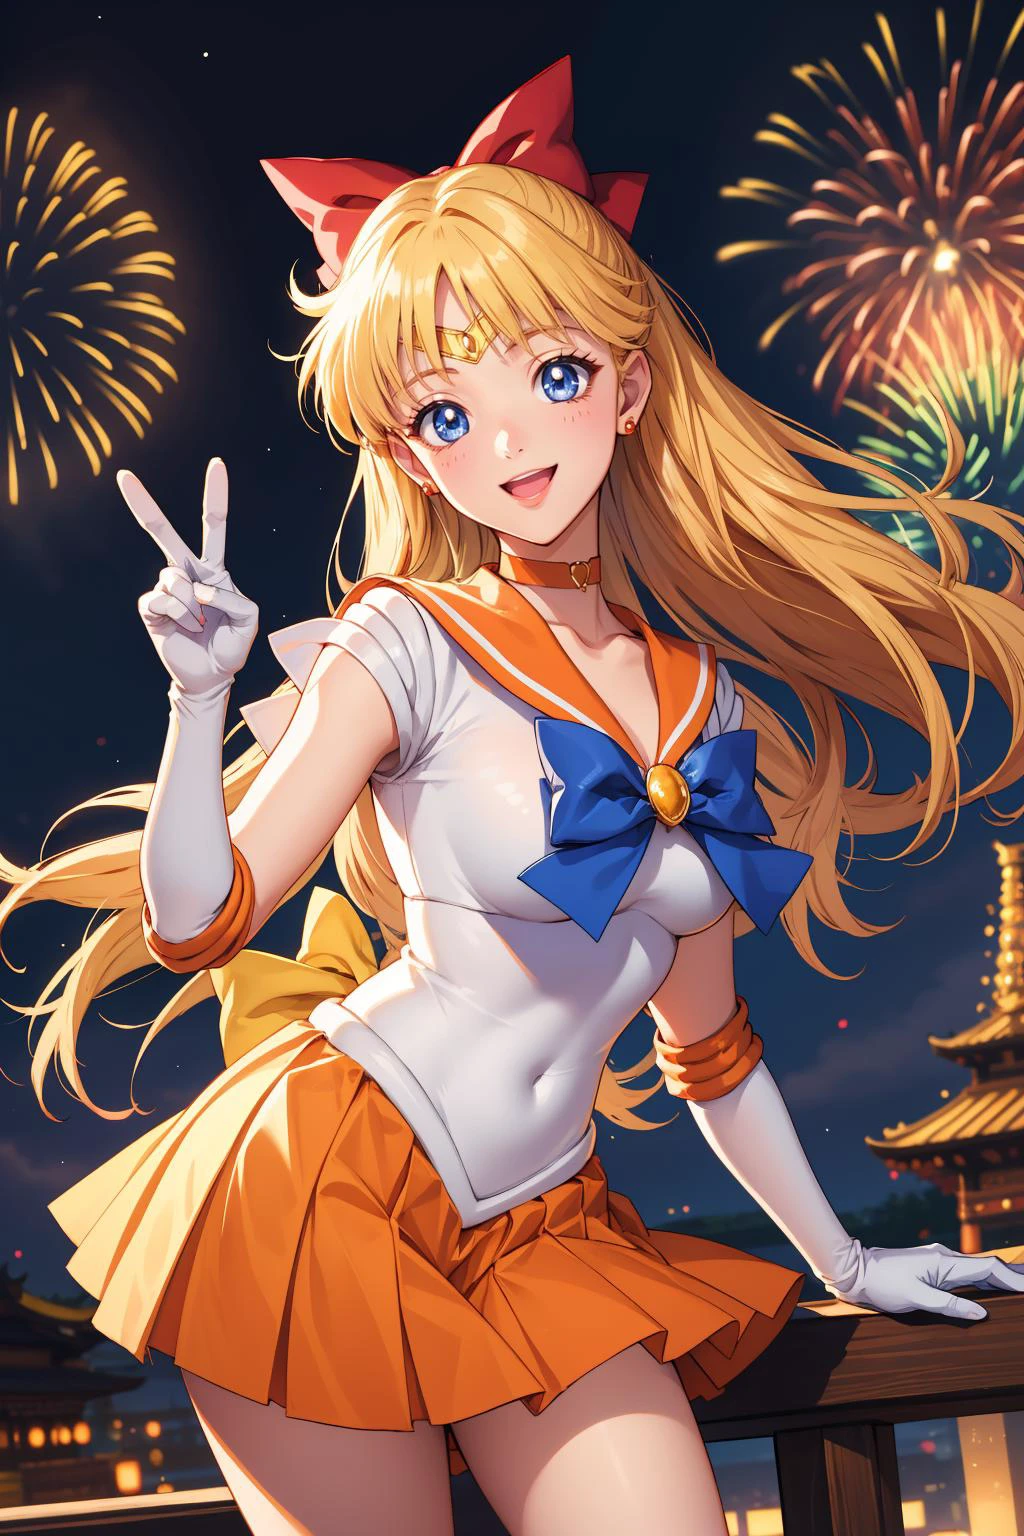 masterpiece, best quality, highres, absurdres, ultra detailed, pretty eyes, perfect pussy
sv1, sailor senshi uniform, orange skirt, elbow gloves, tiara, orange sailor collar, red bow, orange choker, white gloves, jewelry
smile, happy, excited, 2 hand peace sign
outside, temple, night fireworks in background
 